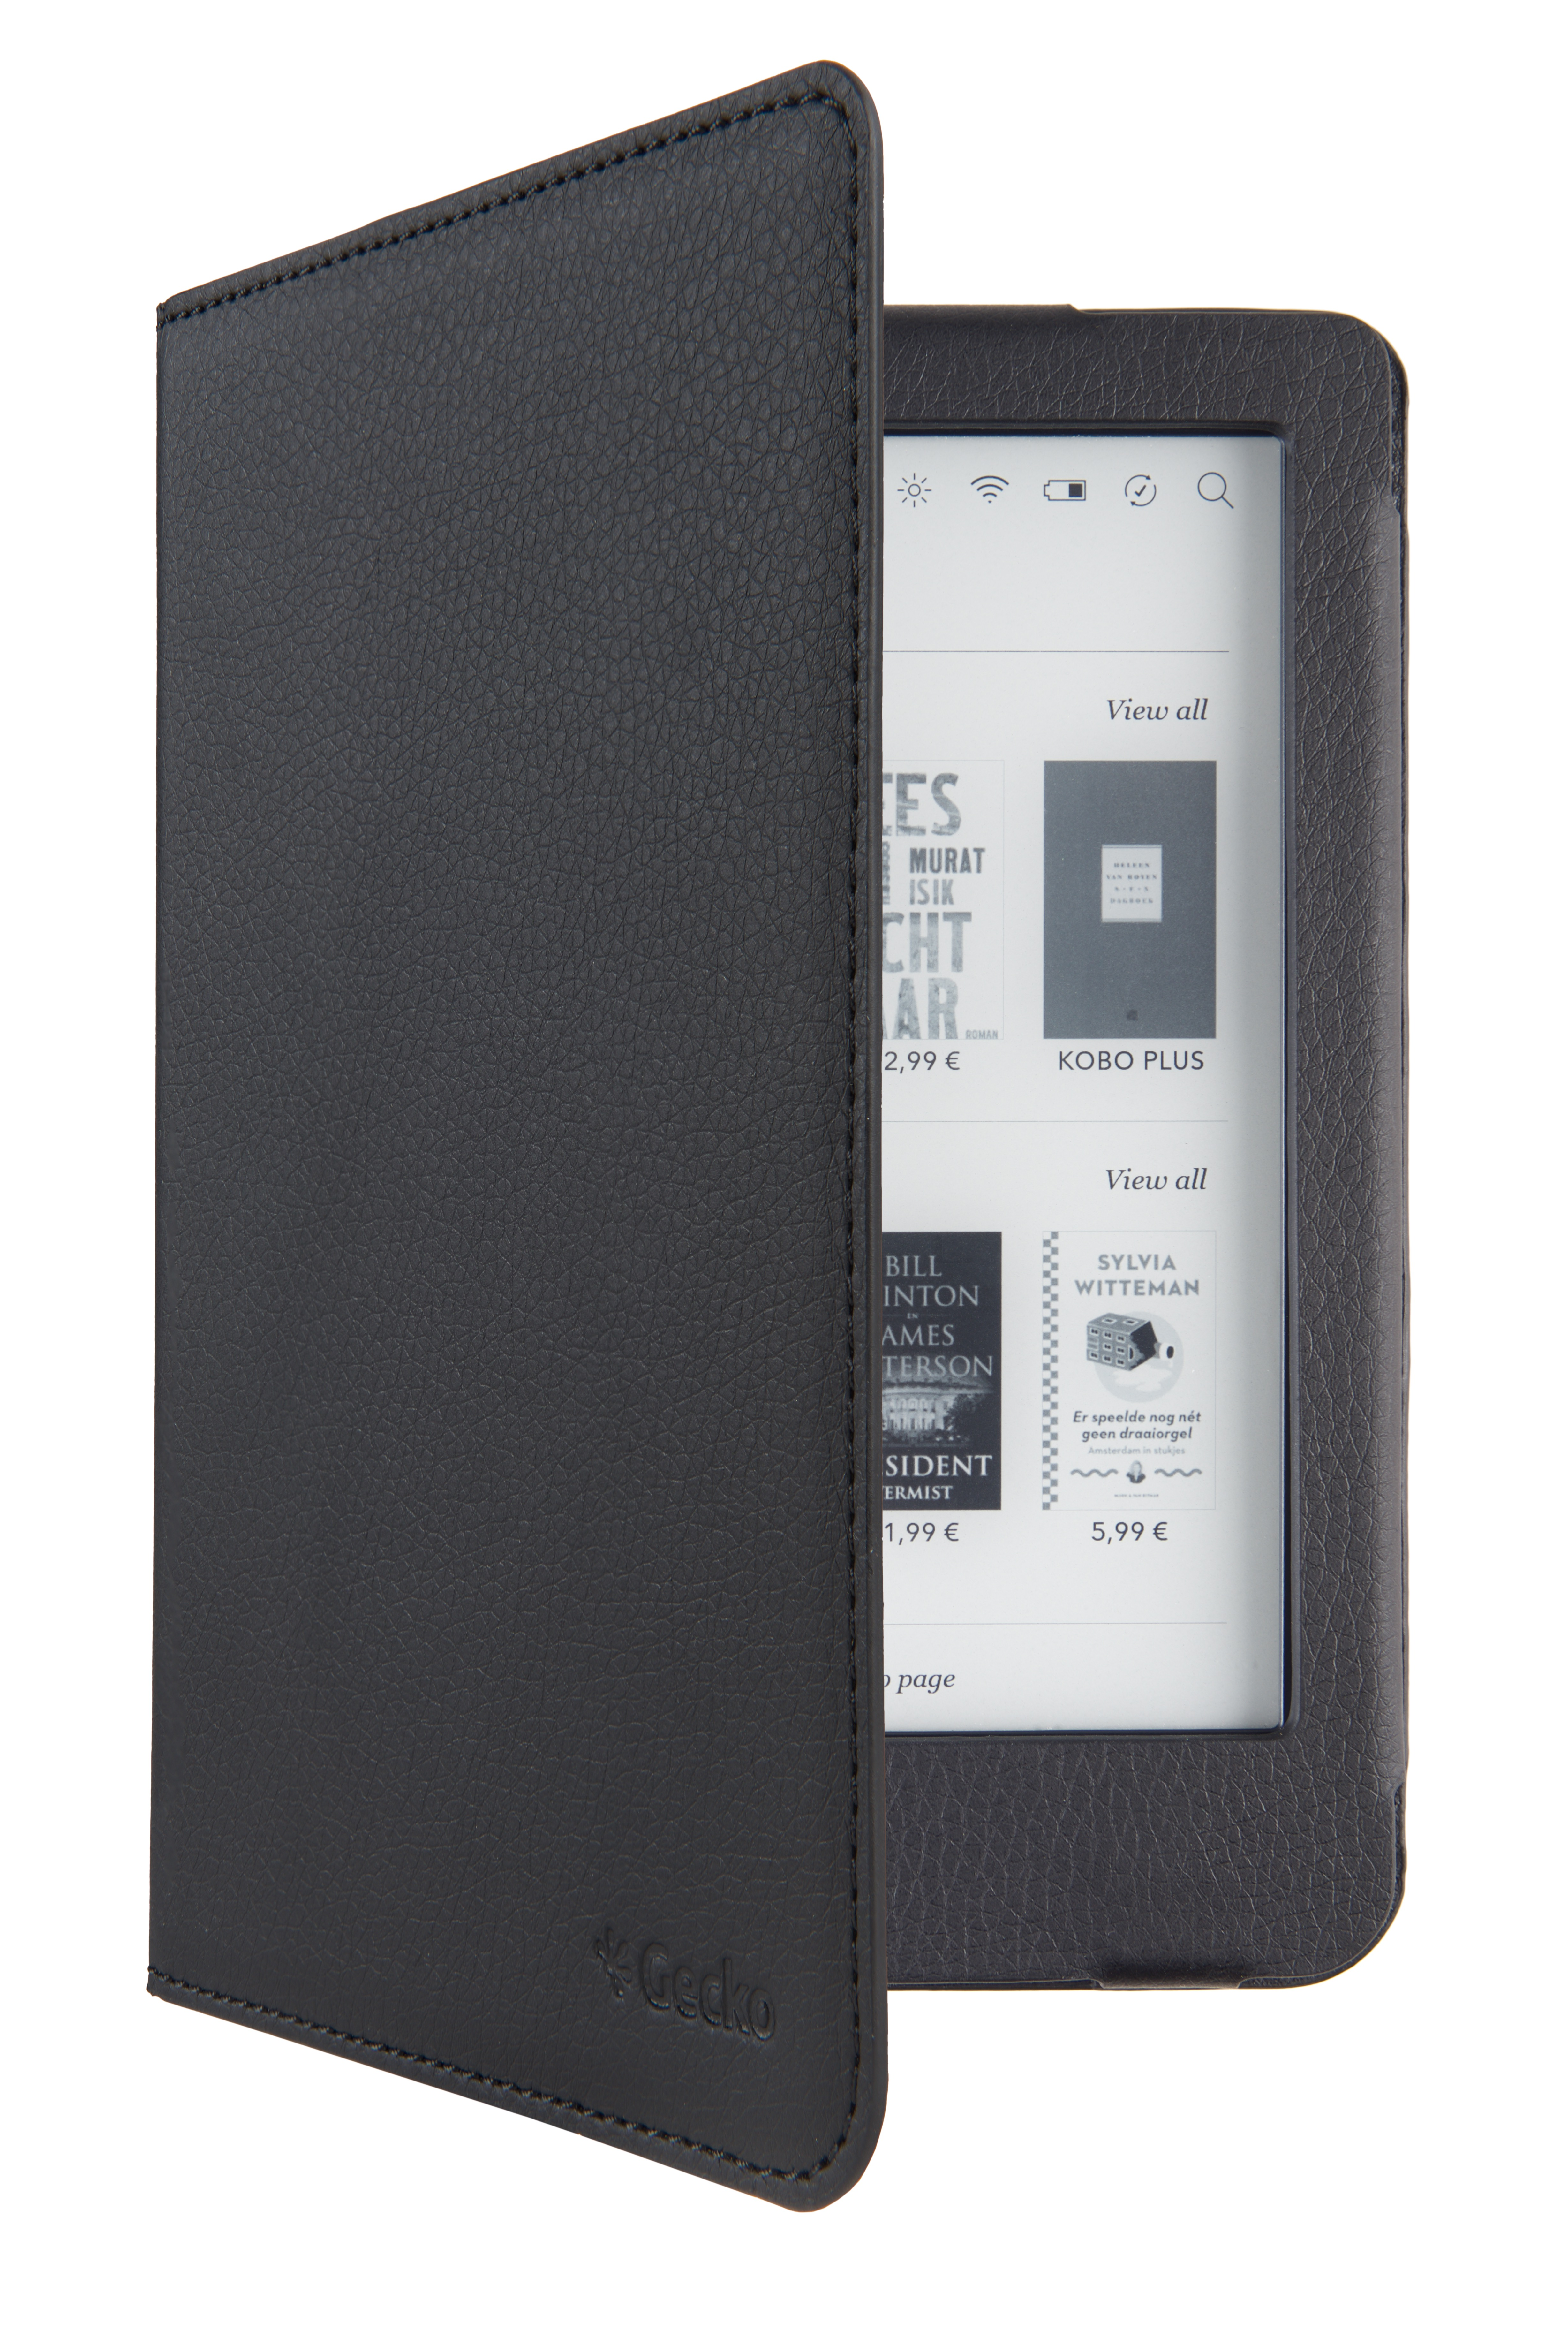 GECKO COVERS Luxe Cover Bookcover E-Book für Reader Kobo PU Leather, Hülle Schwarz